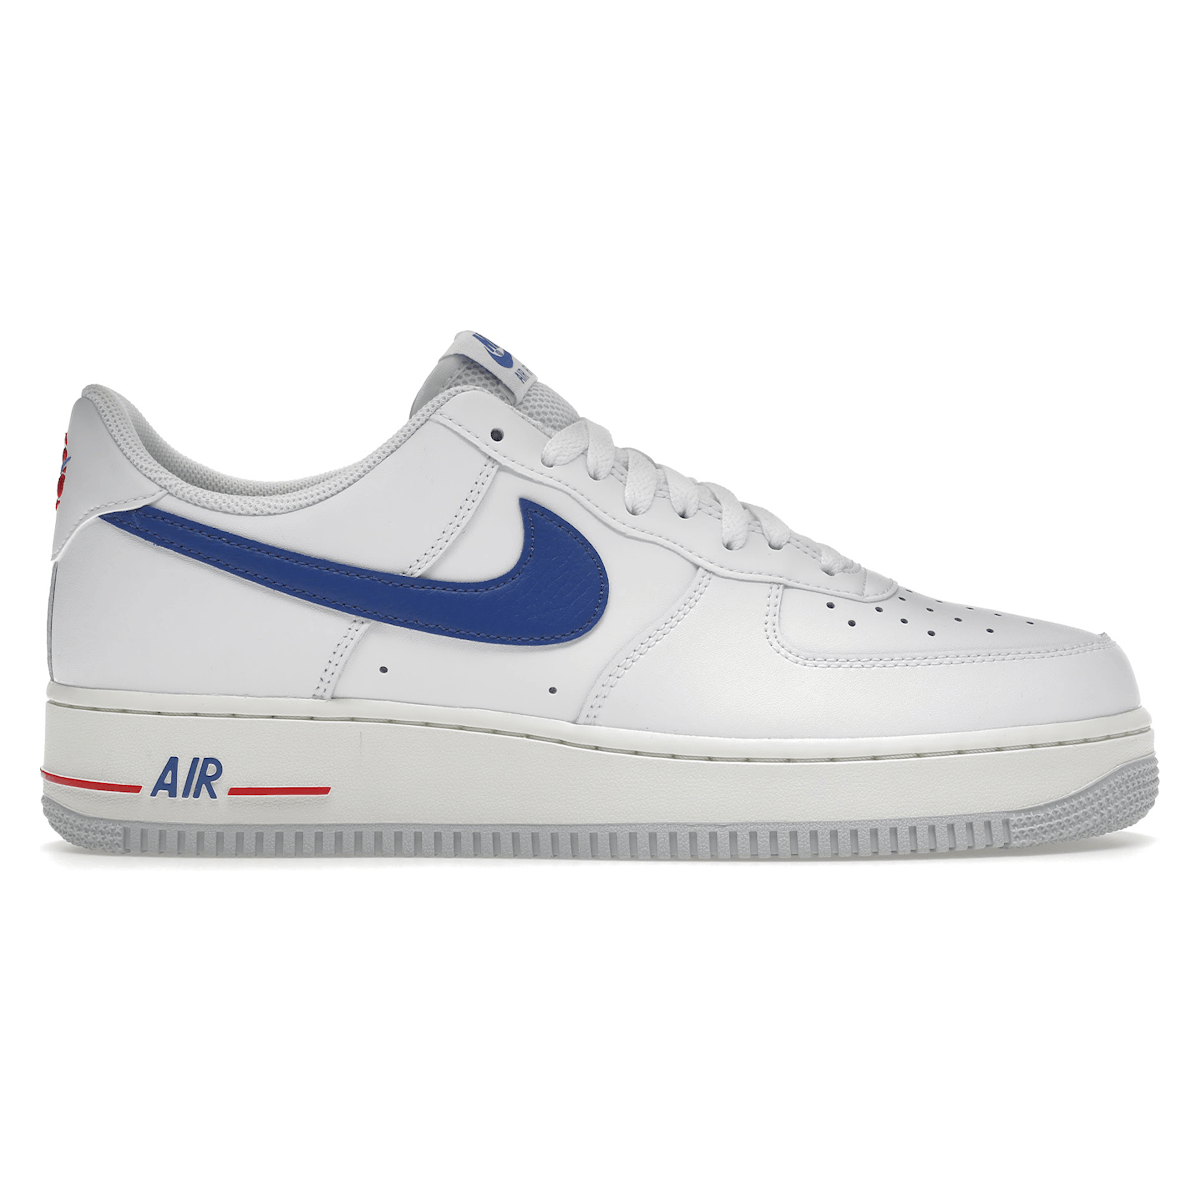 Nike Air Force 1 Low USA White